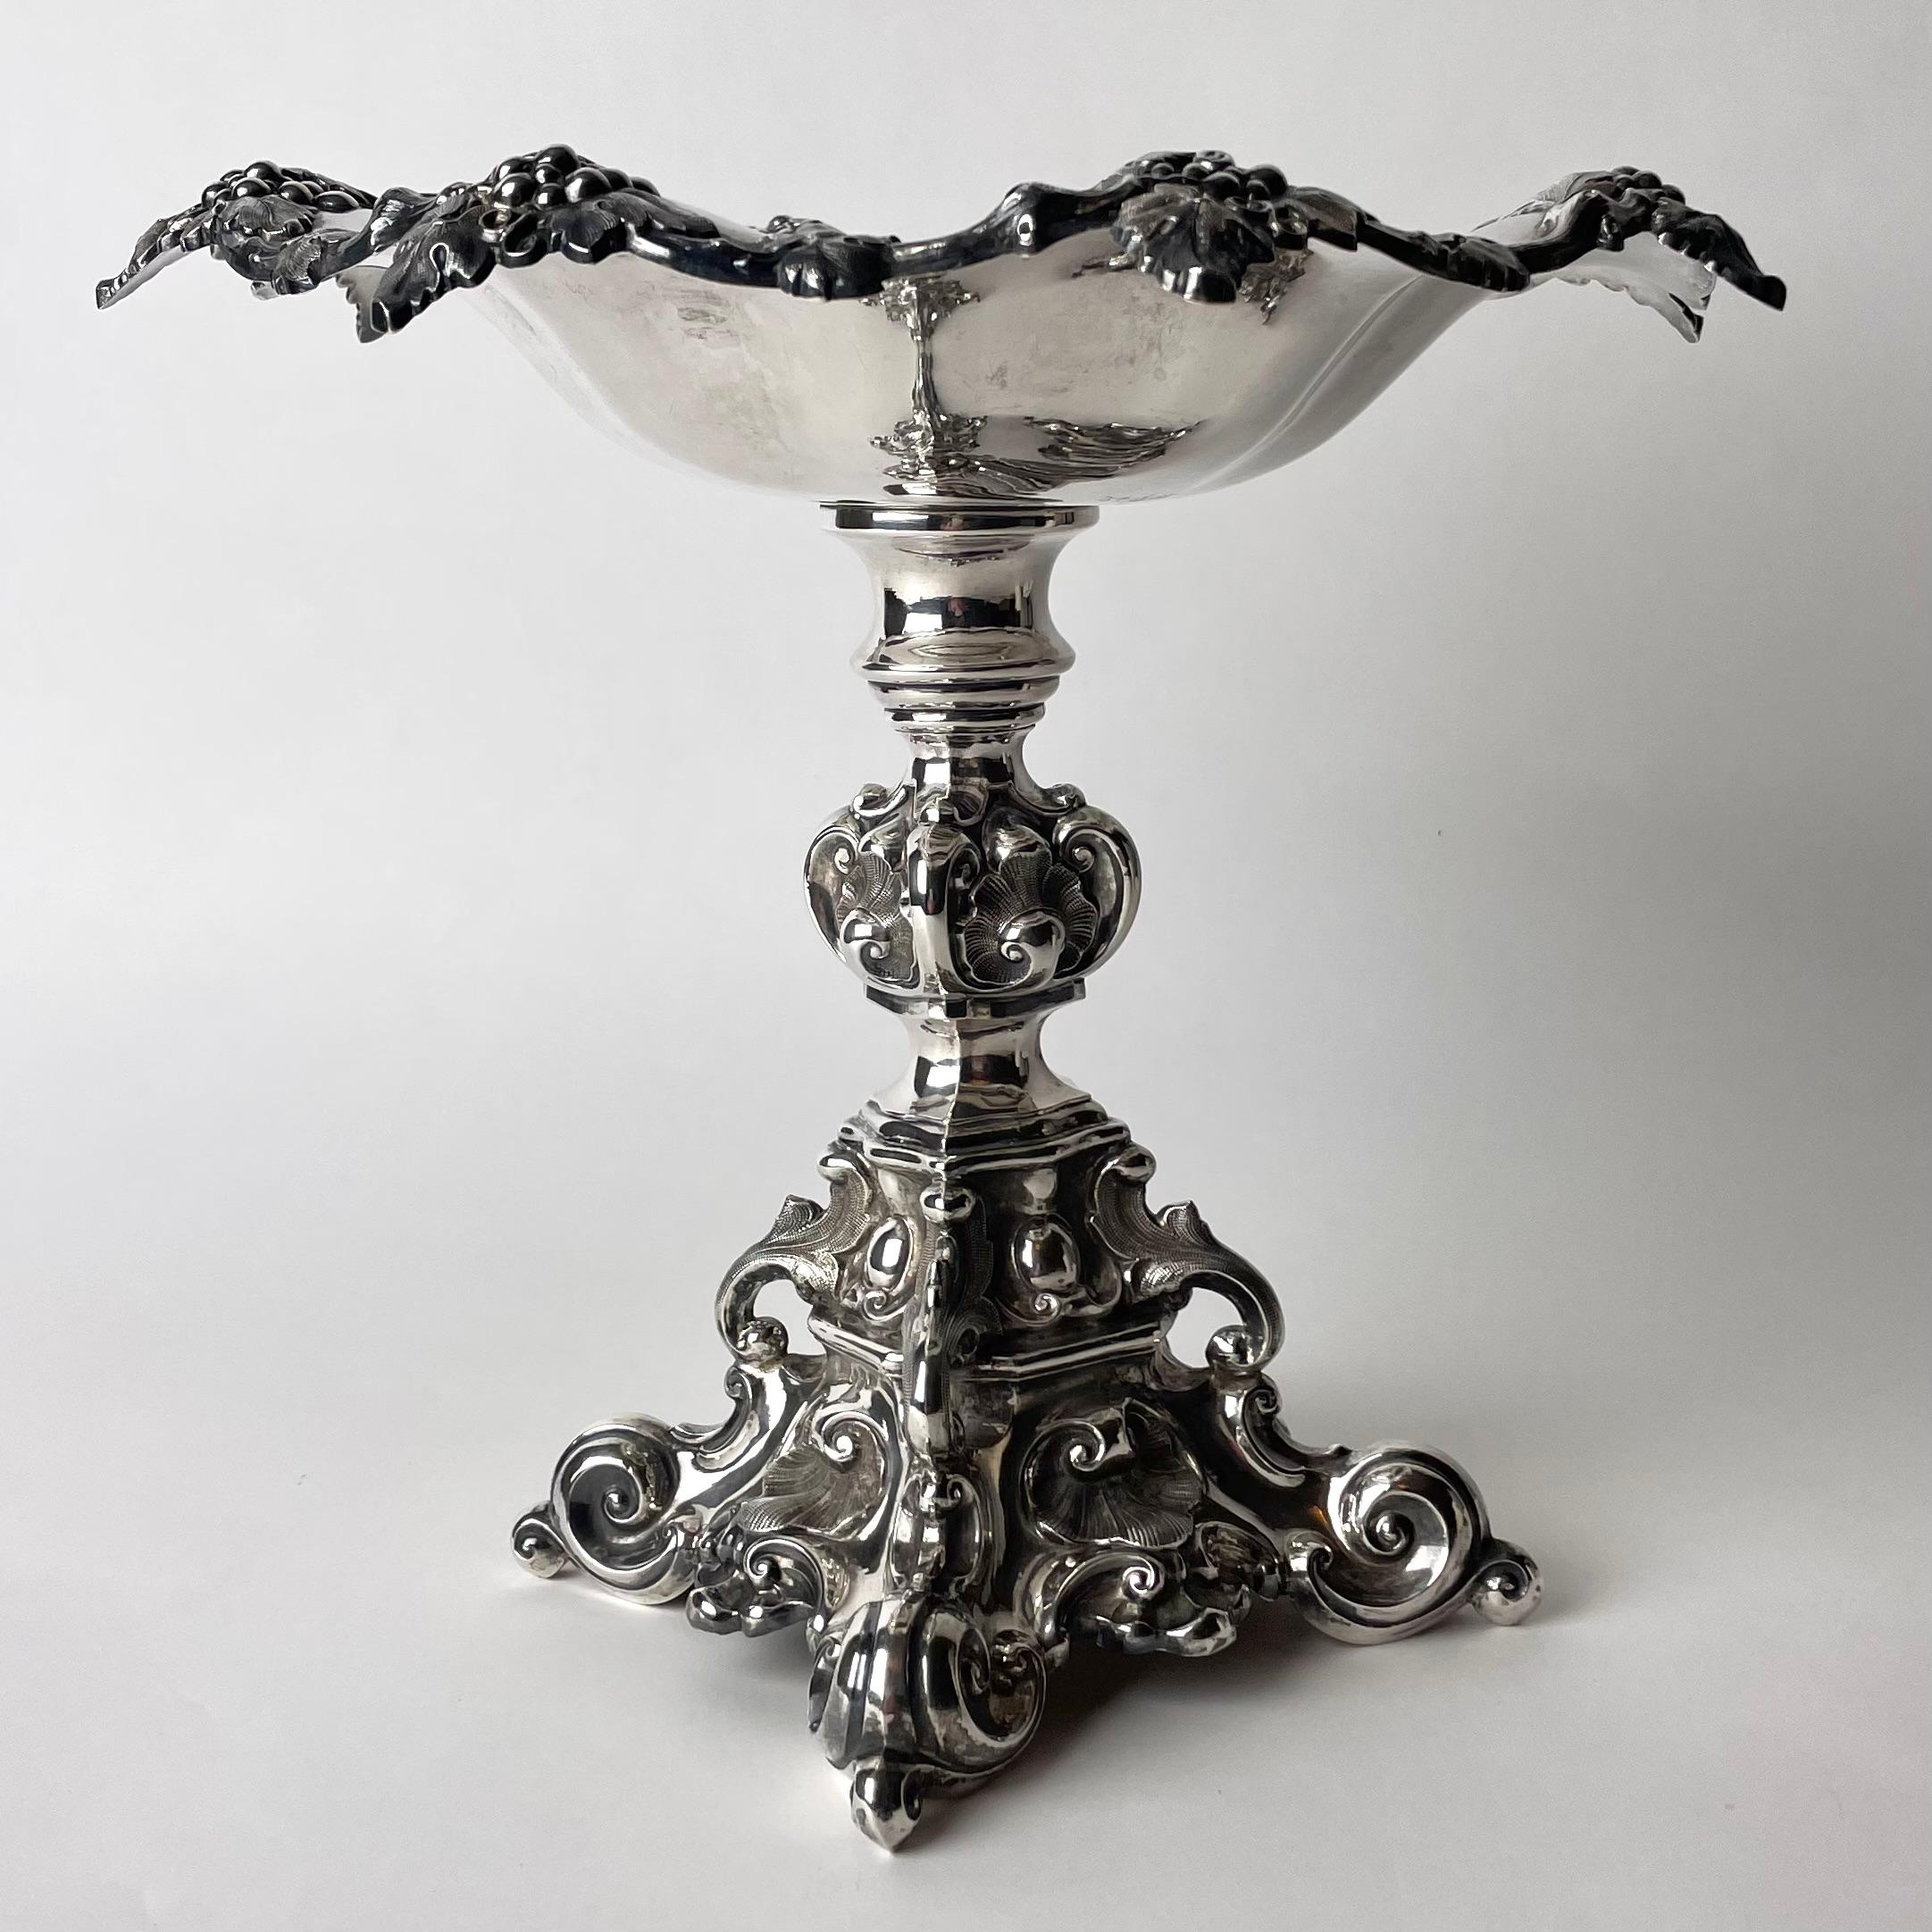 Rococo Revival Elegant Fruit Bowl in hallmarked silver from Gothenburg, Sweden dated 1858 For Sale